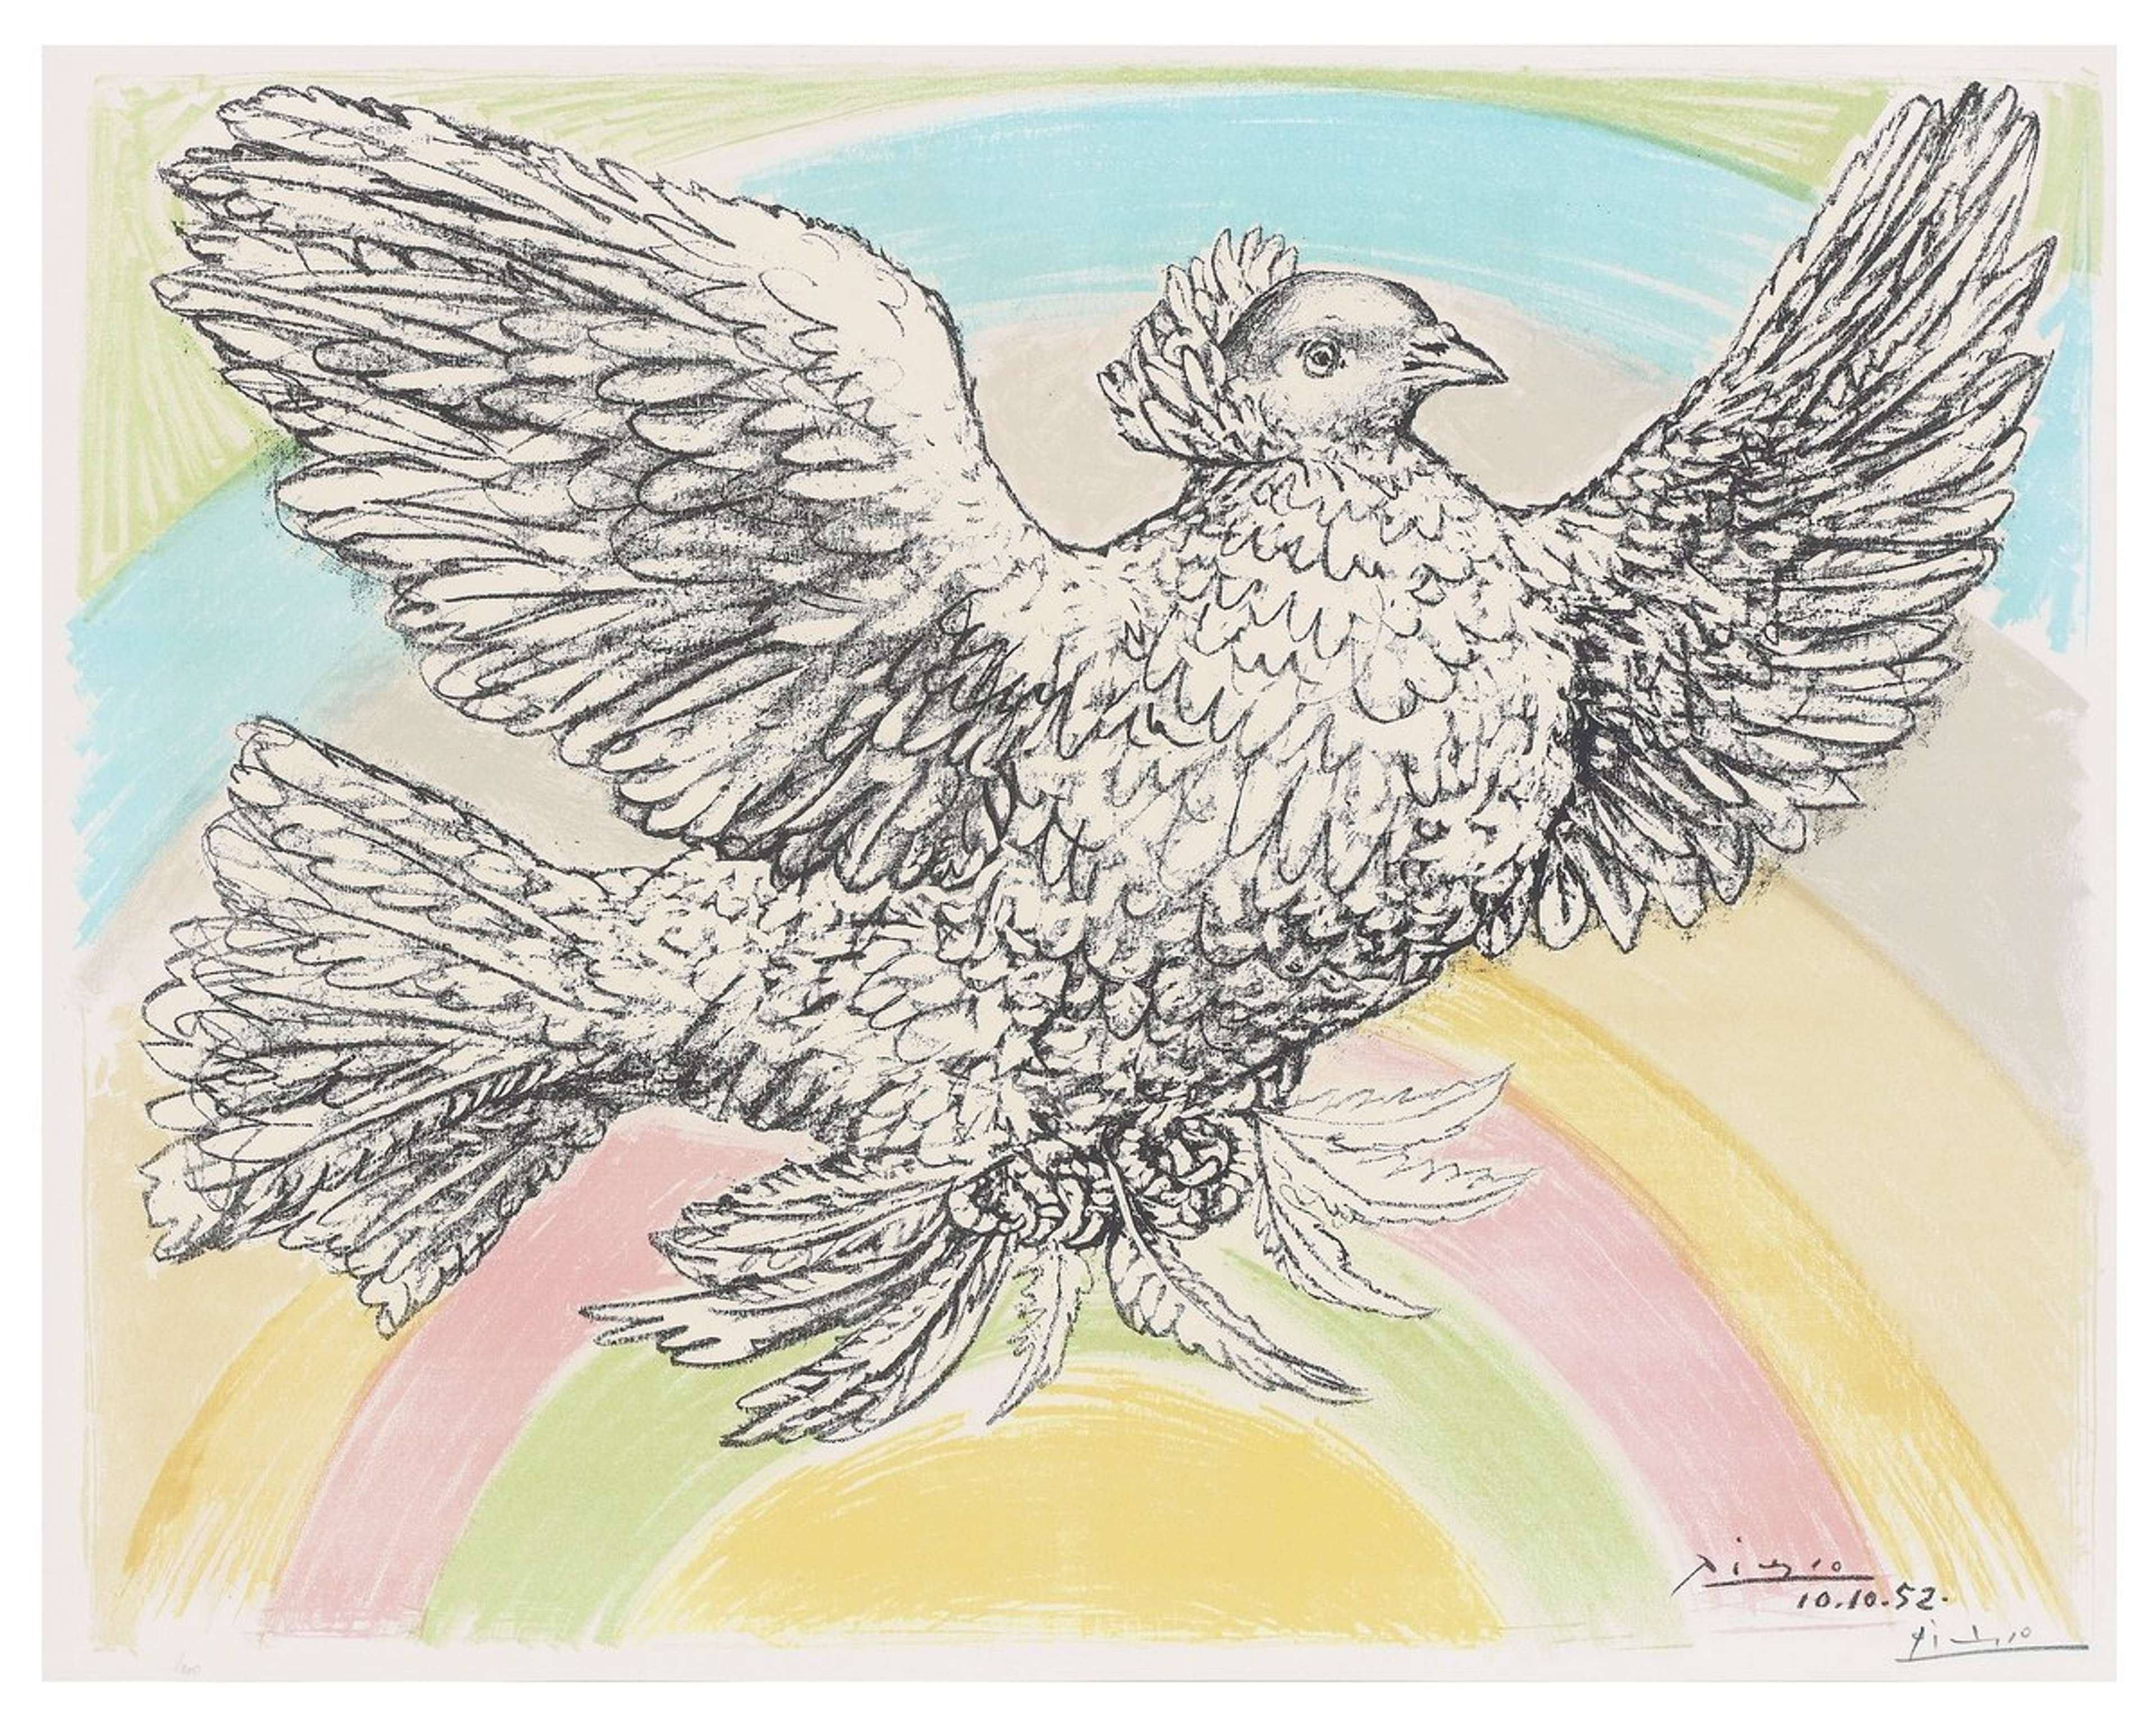 A lithography depicting a dove with black ink, set against a pastel coloured rainbow.